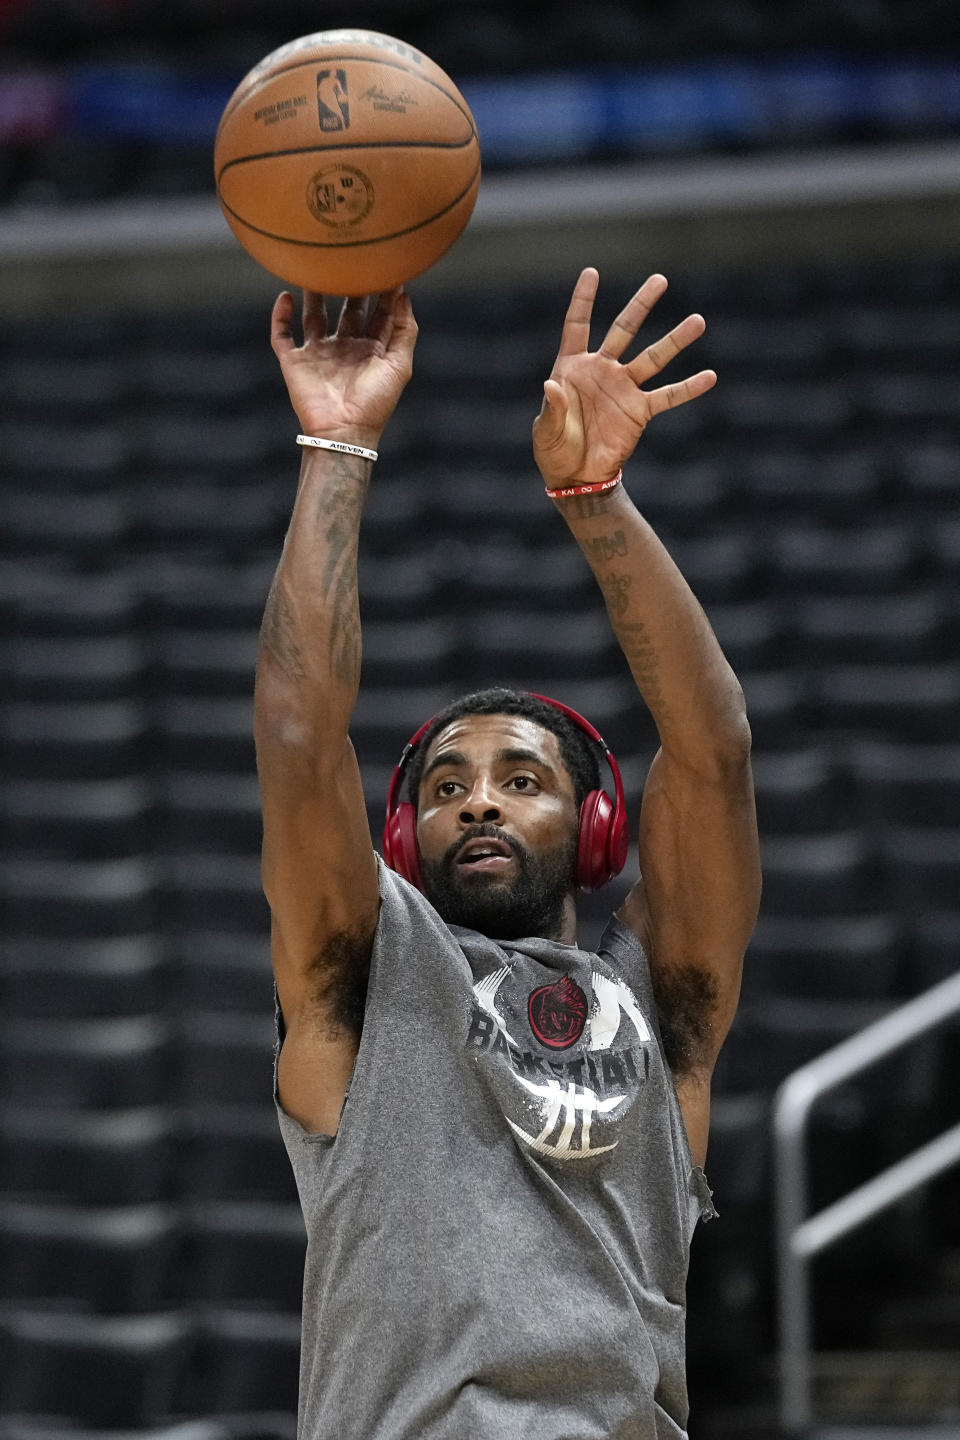 Dallas Mavericks guard Kyrie Irving warms up prior to an NBA basketball game against the Los Angeles Clippers Wednesday, Feb. 8, 2023, in Los Angeles. (AP Photo/Mark J. Terrill)